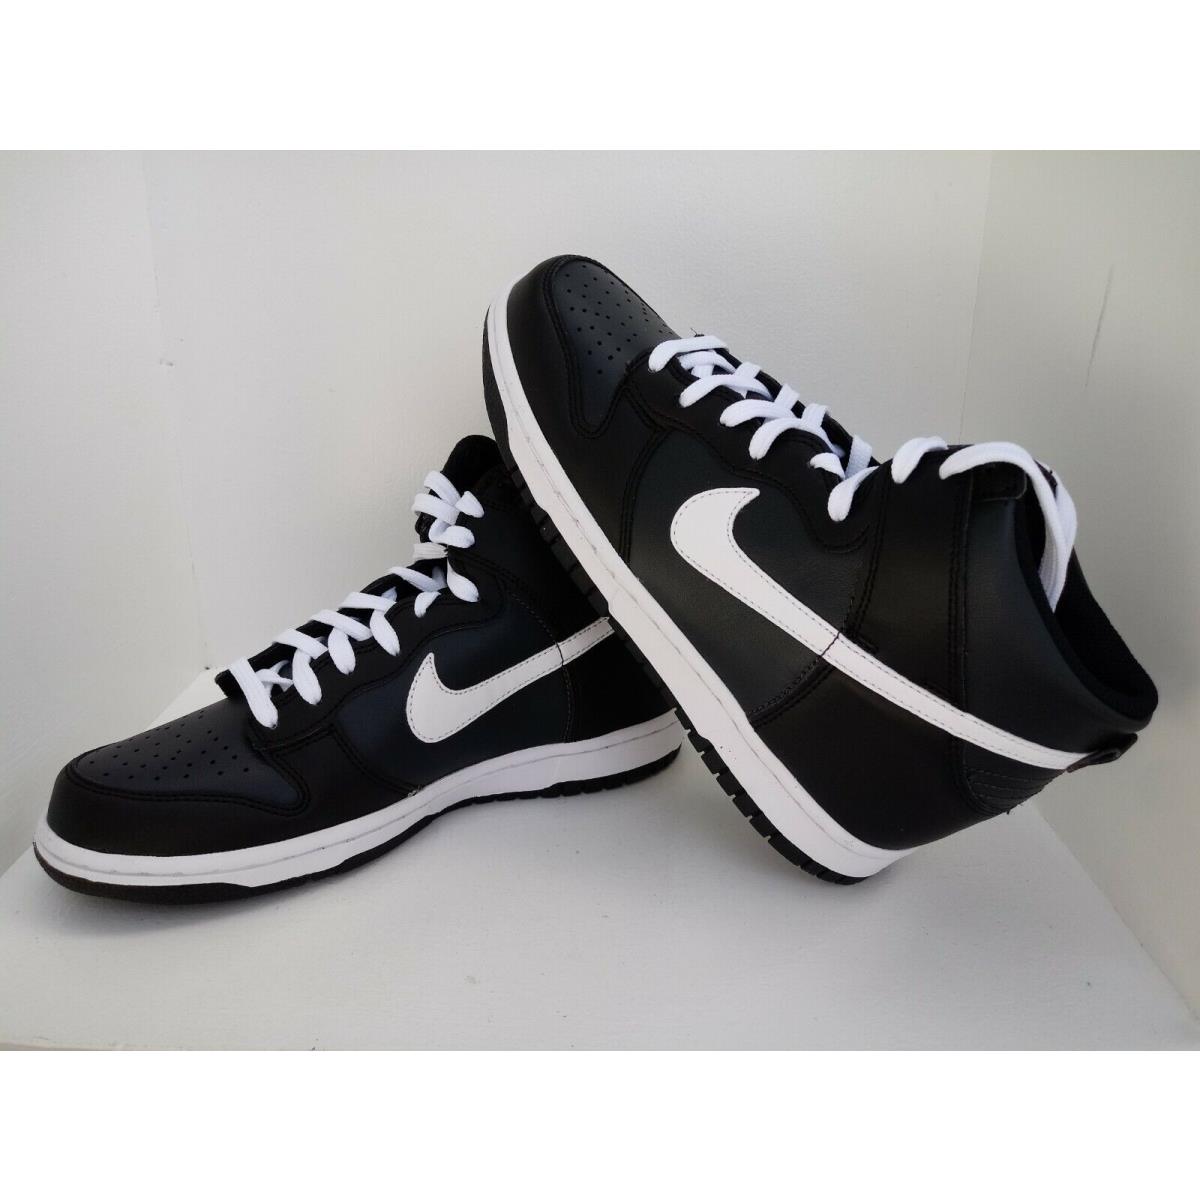 Nike shoes Dunk High - Anthracite/White-Black 3